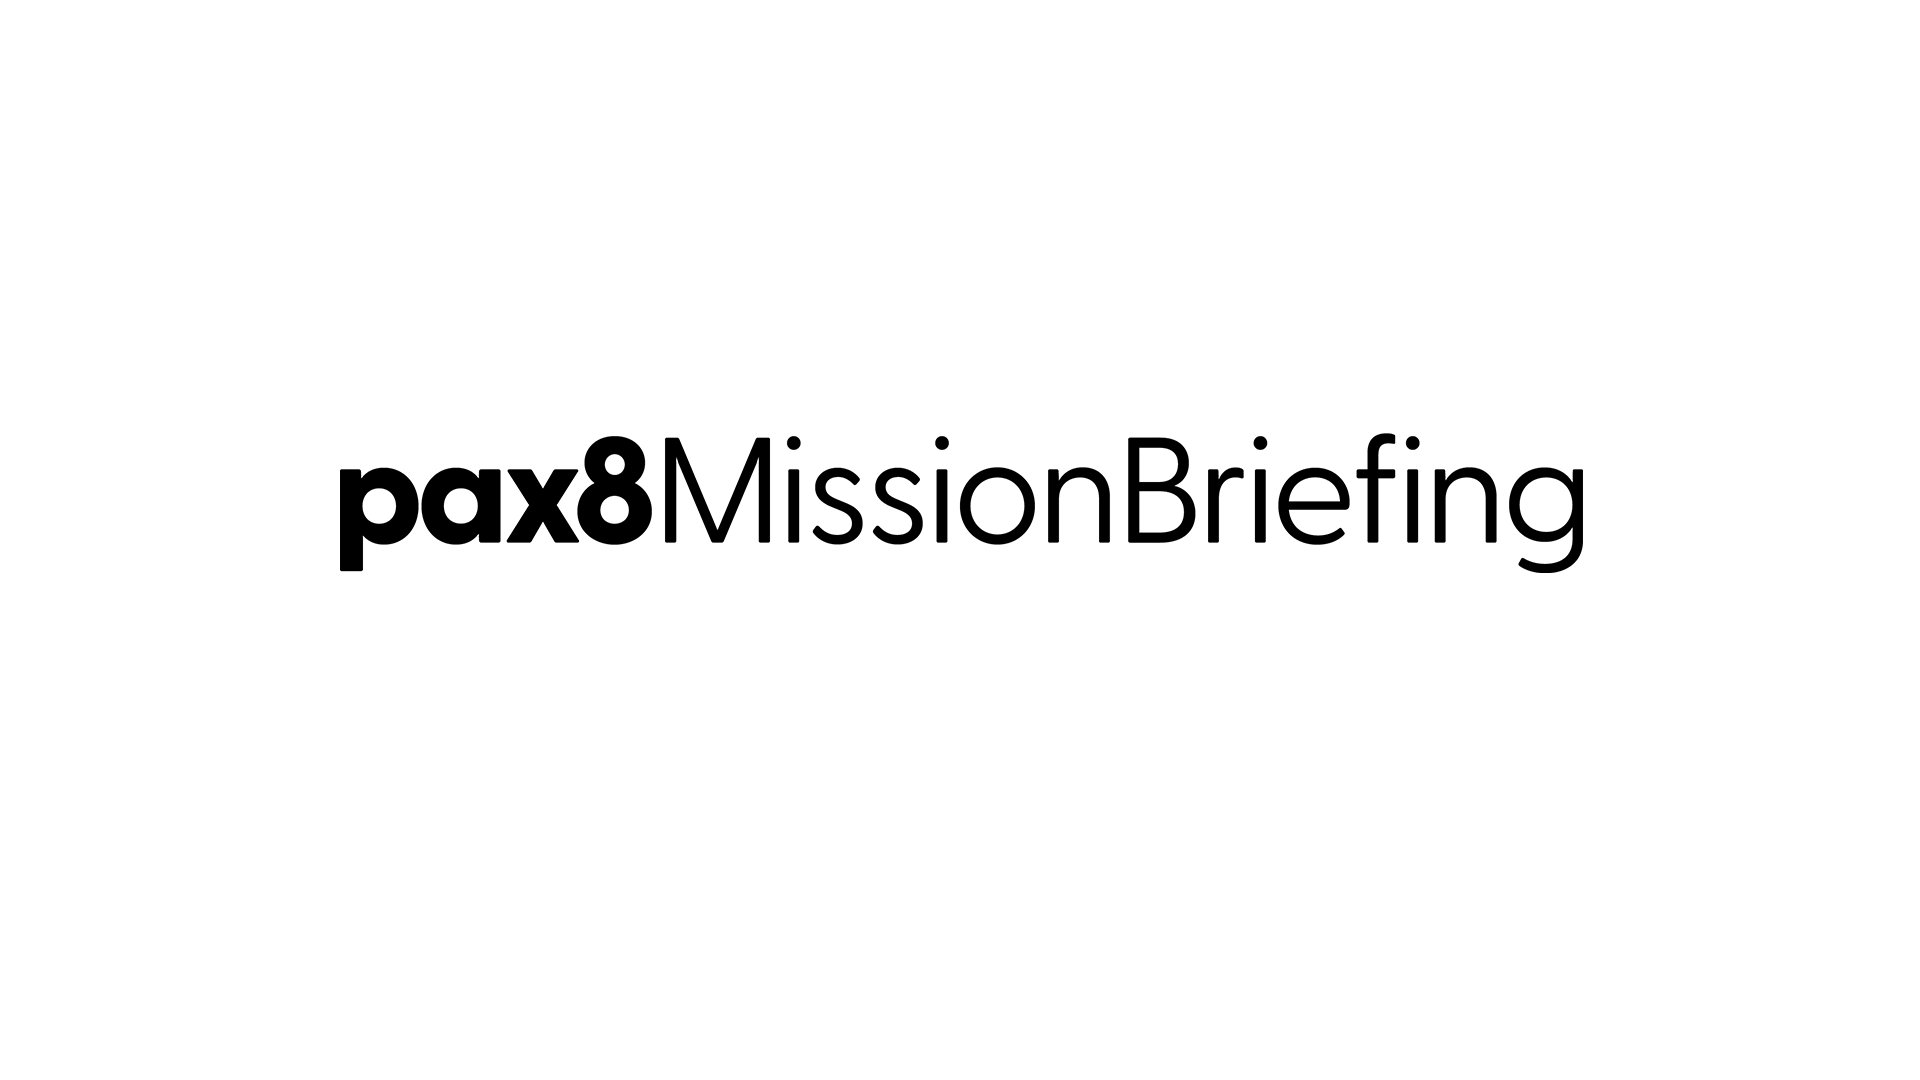 Pax8 MissionBriefing